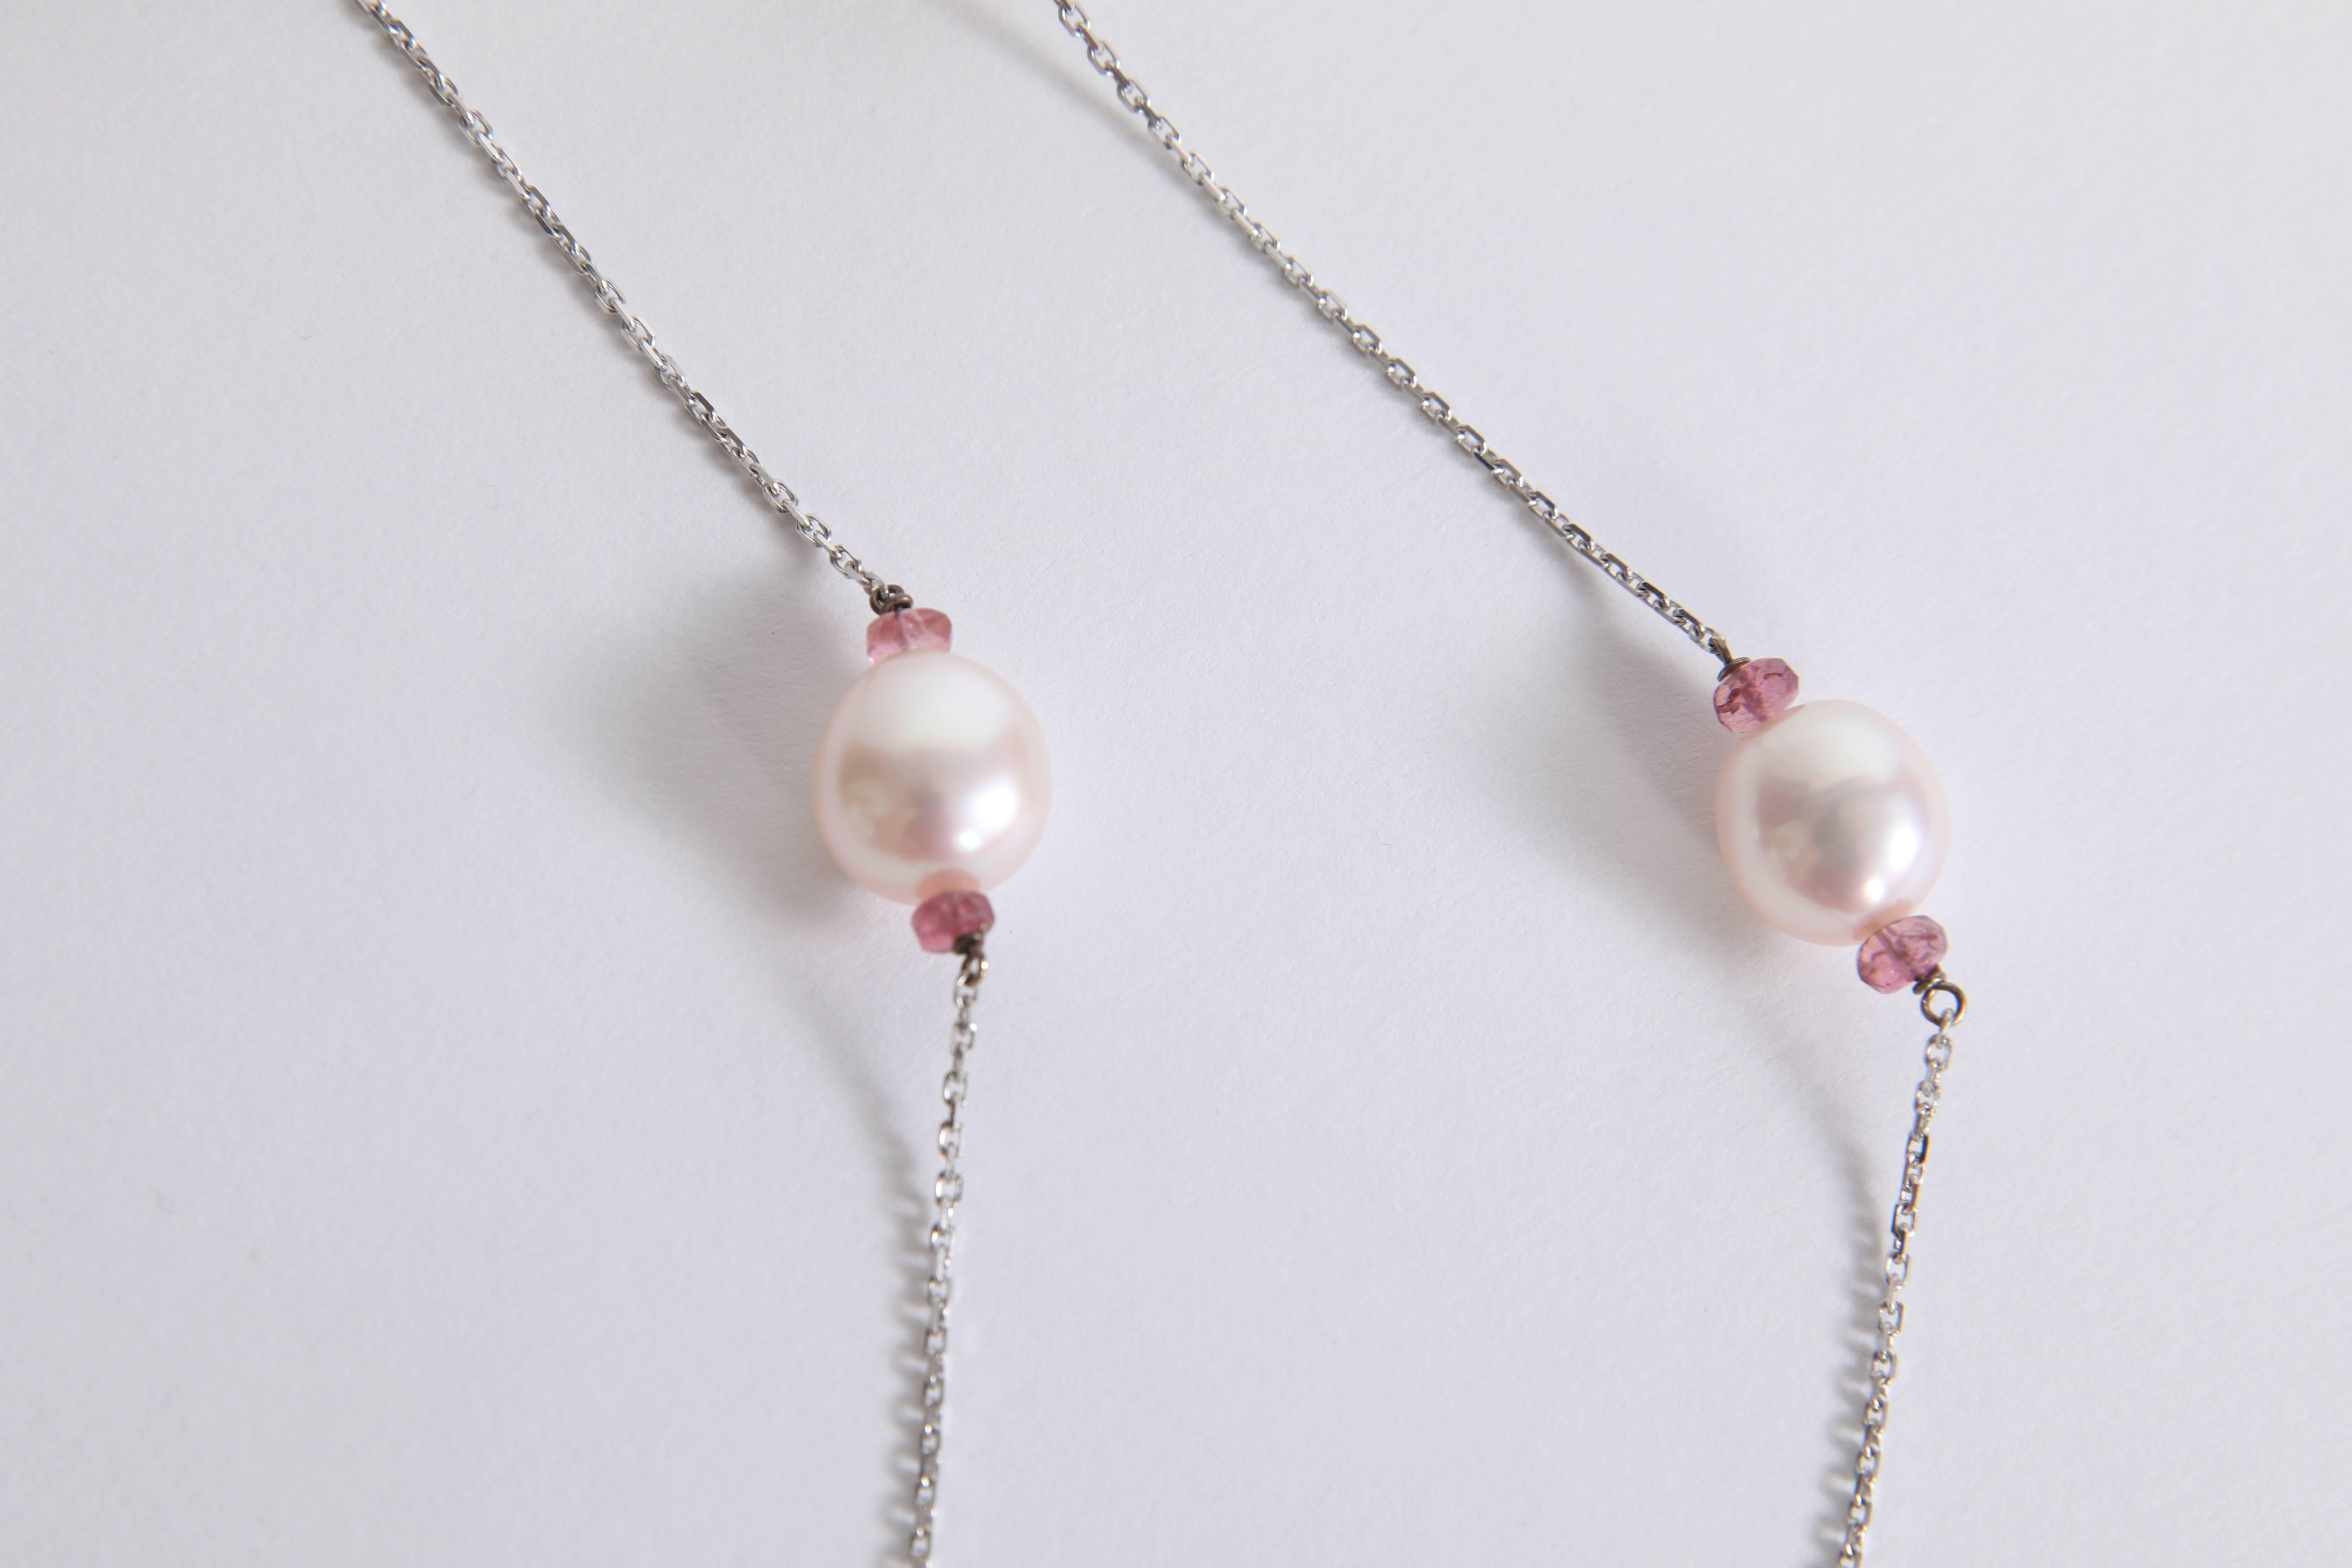 Contemporary Pearls Necklace with Pink Tourmalines Faceted Washers by Marion Jeantet